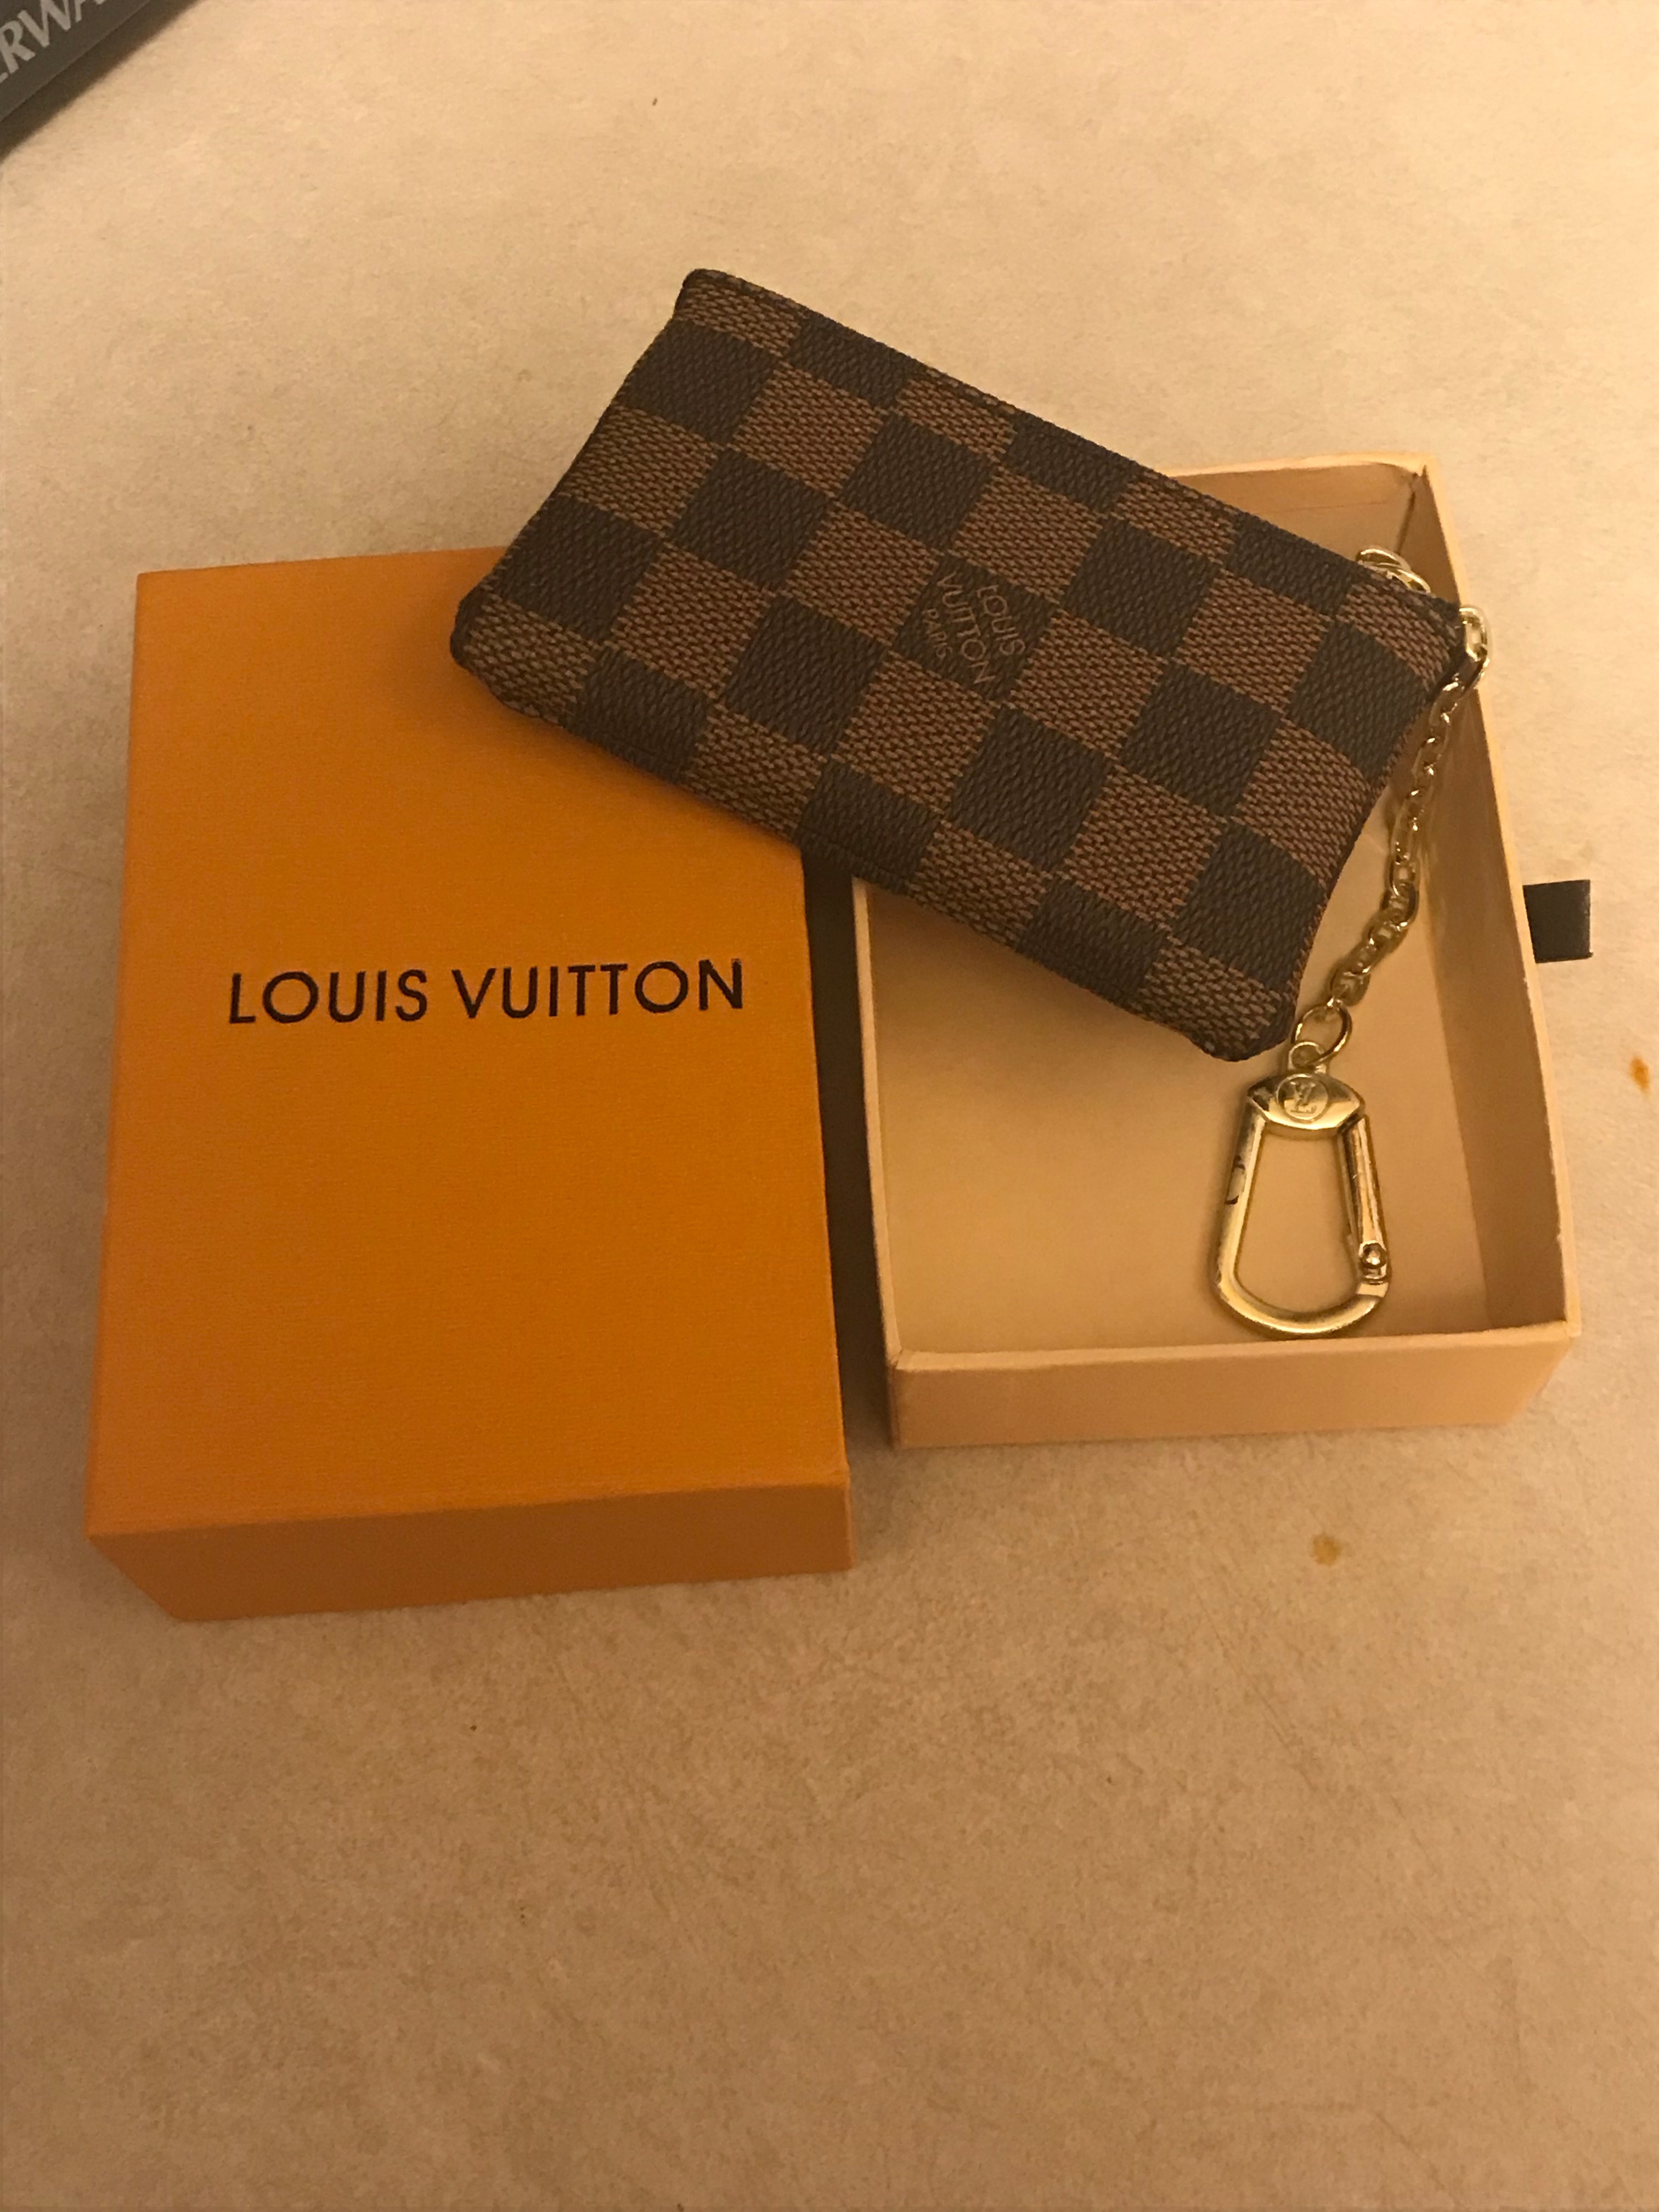 11 Louis Vuitton Items That Are And Aren't Worth The Money